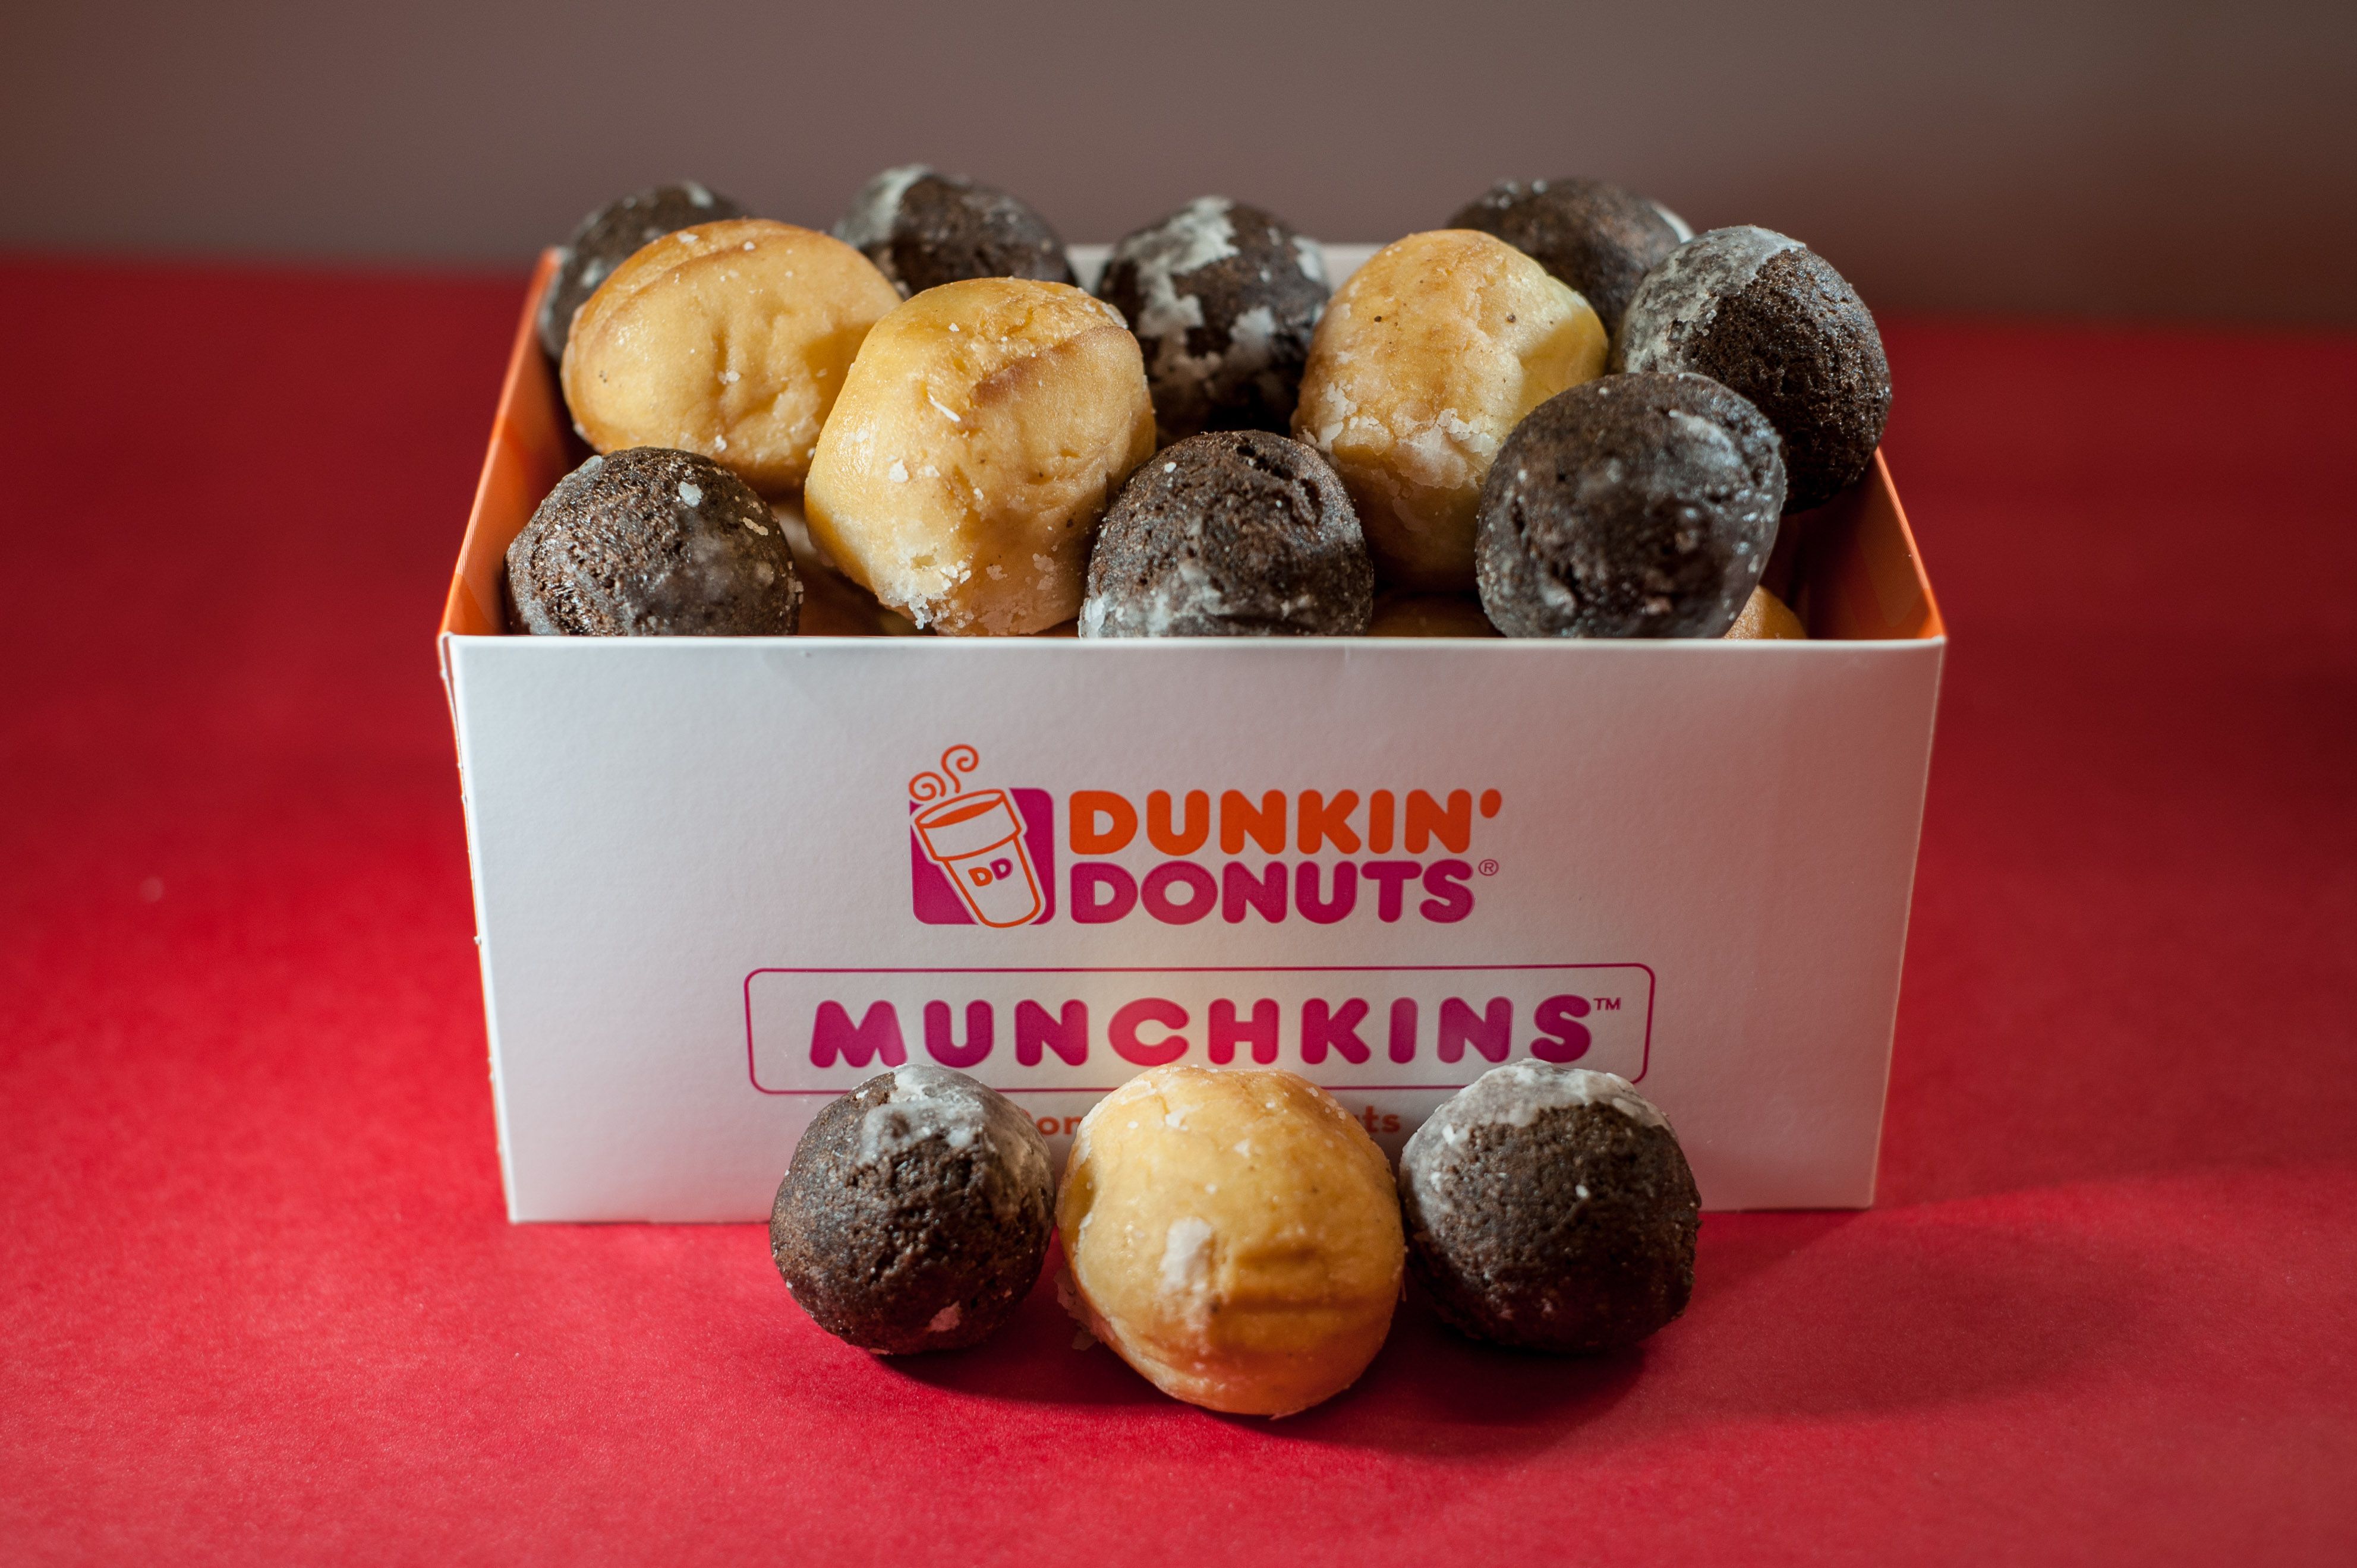 how much are munchkins at dunkin doughnuts